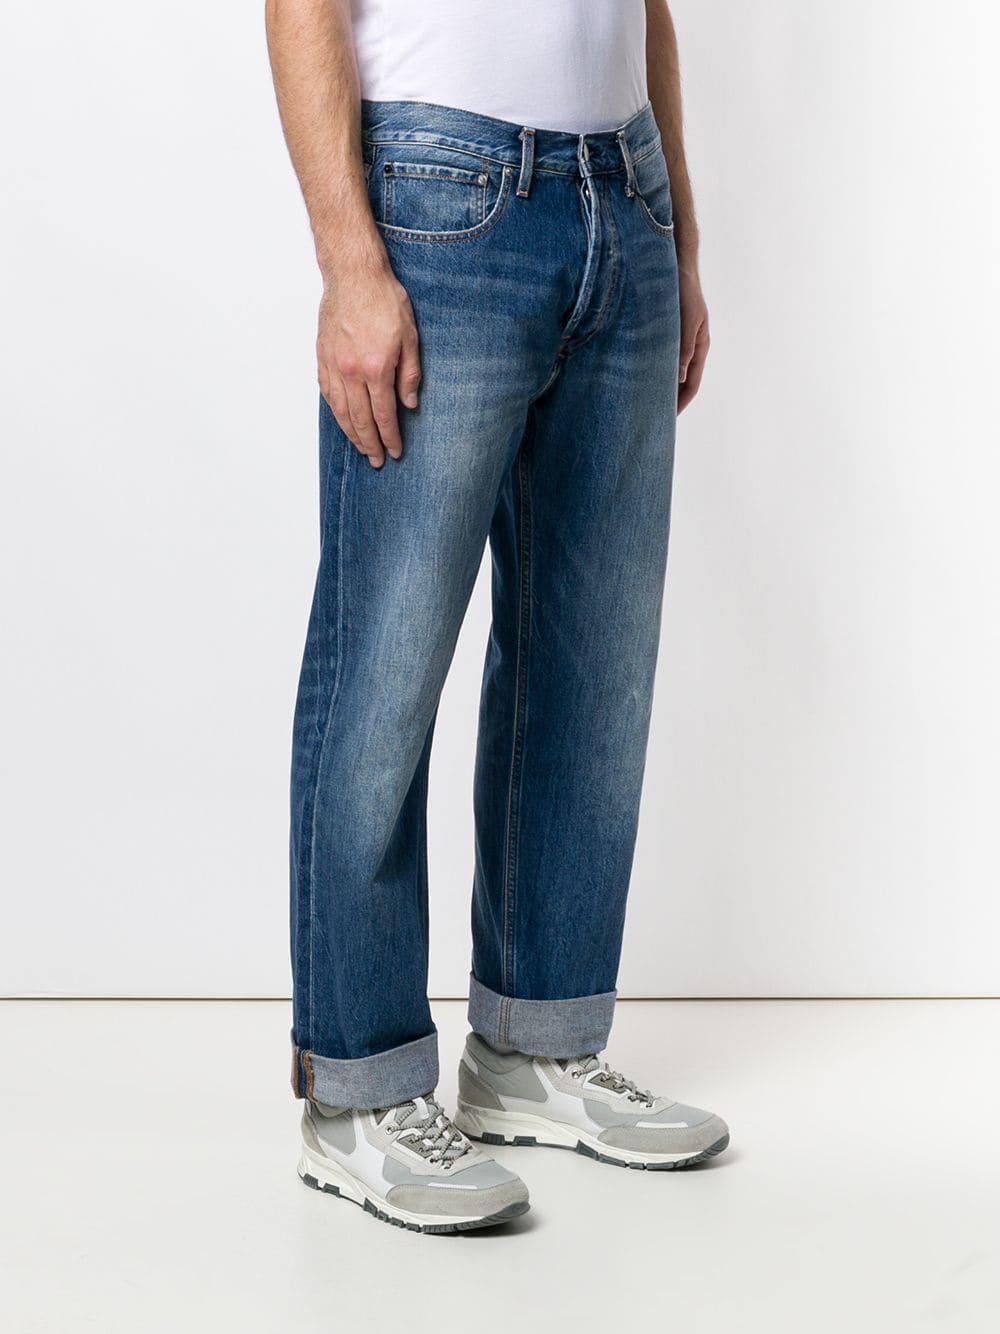 Calvin Klein Relaxed Fit Jeans in Blue for Men - Lyst